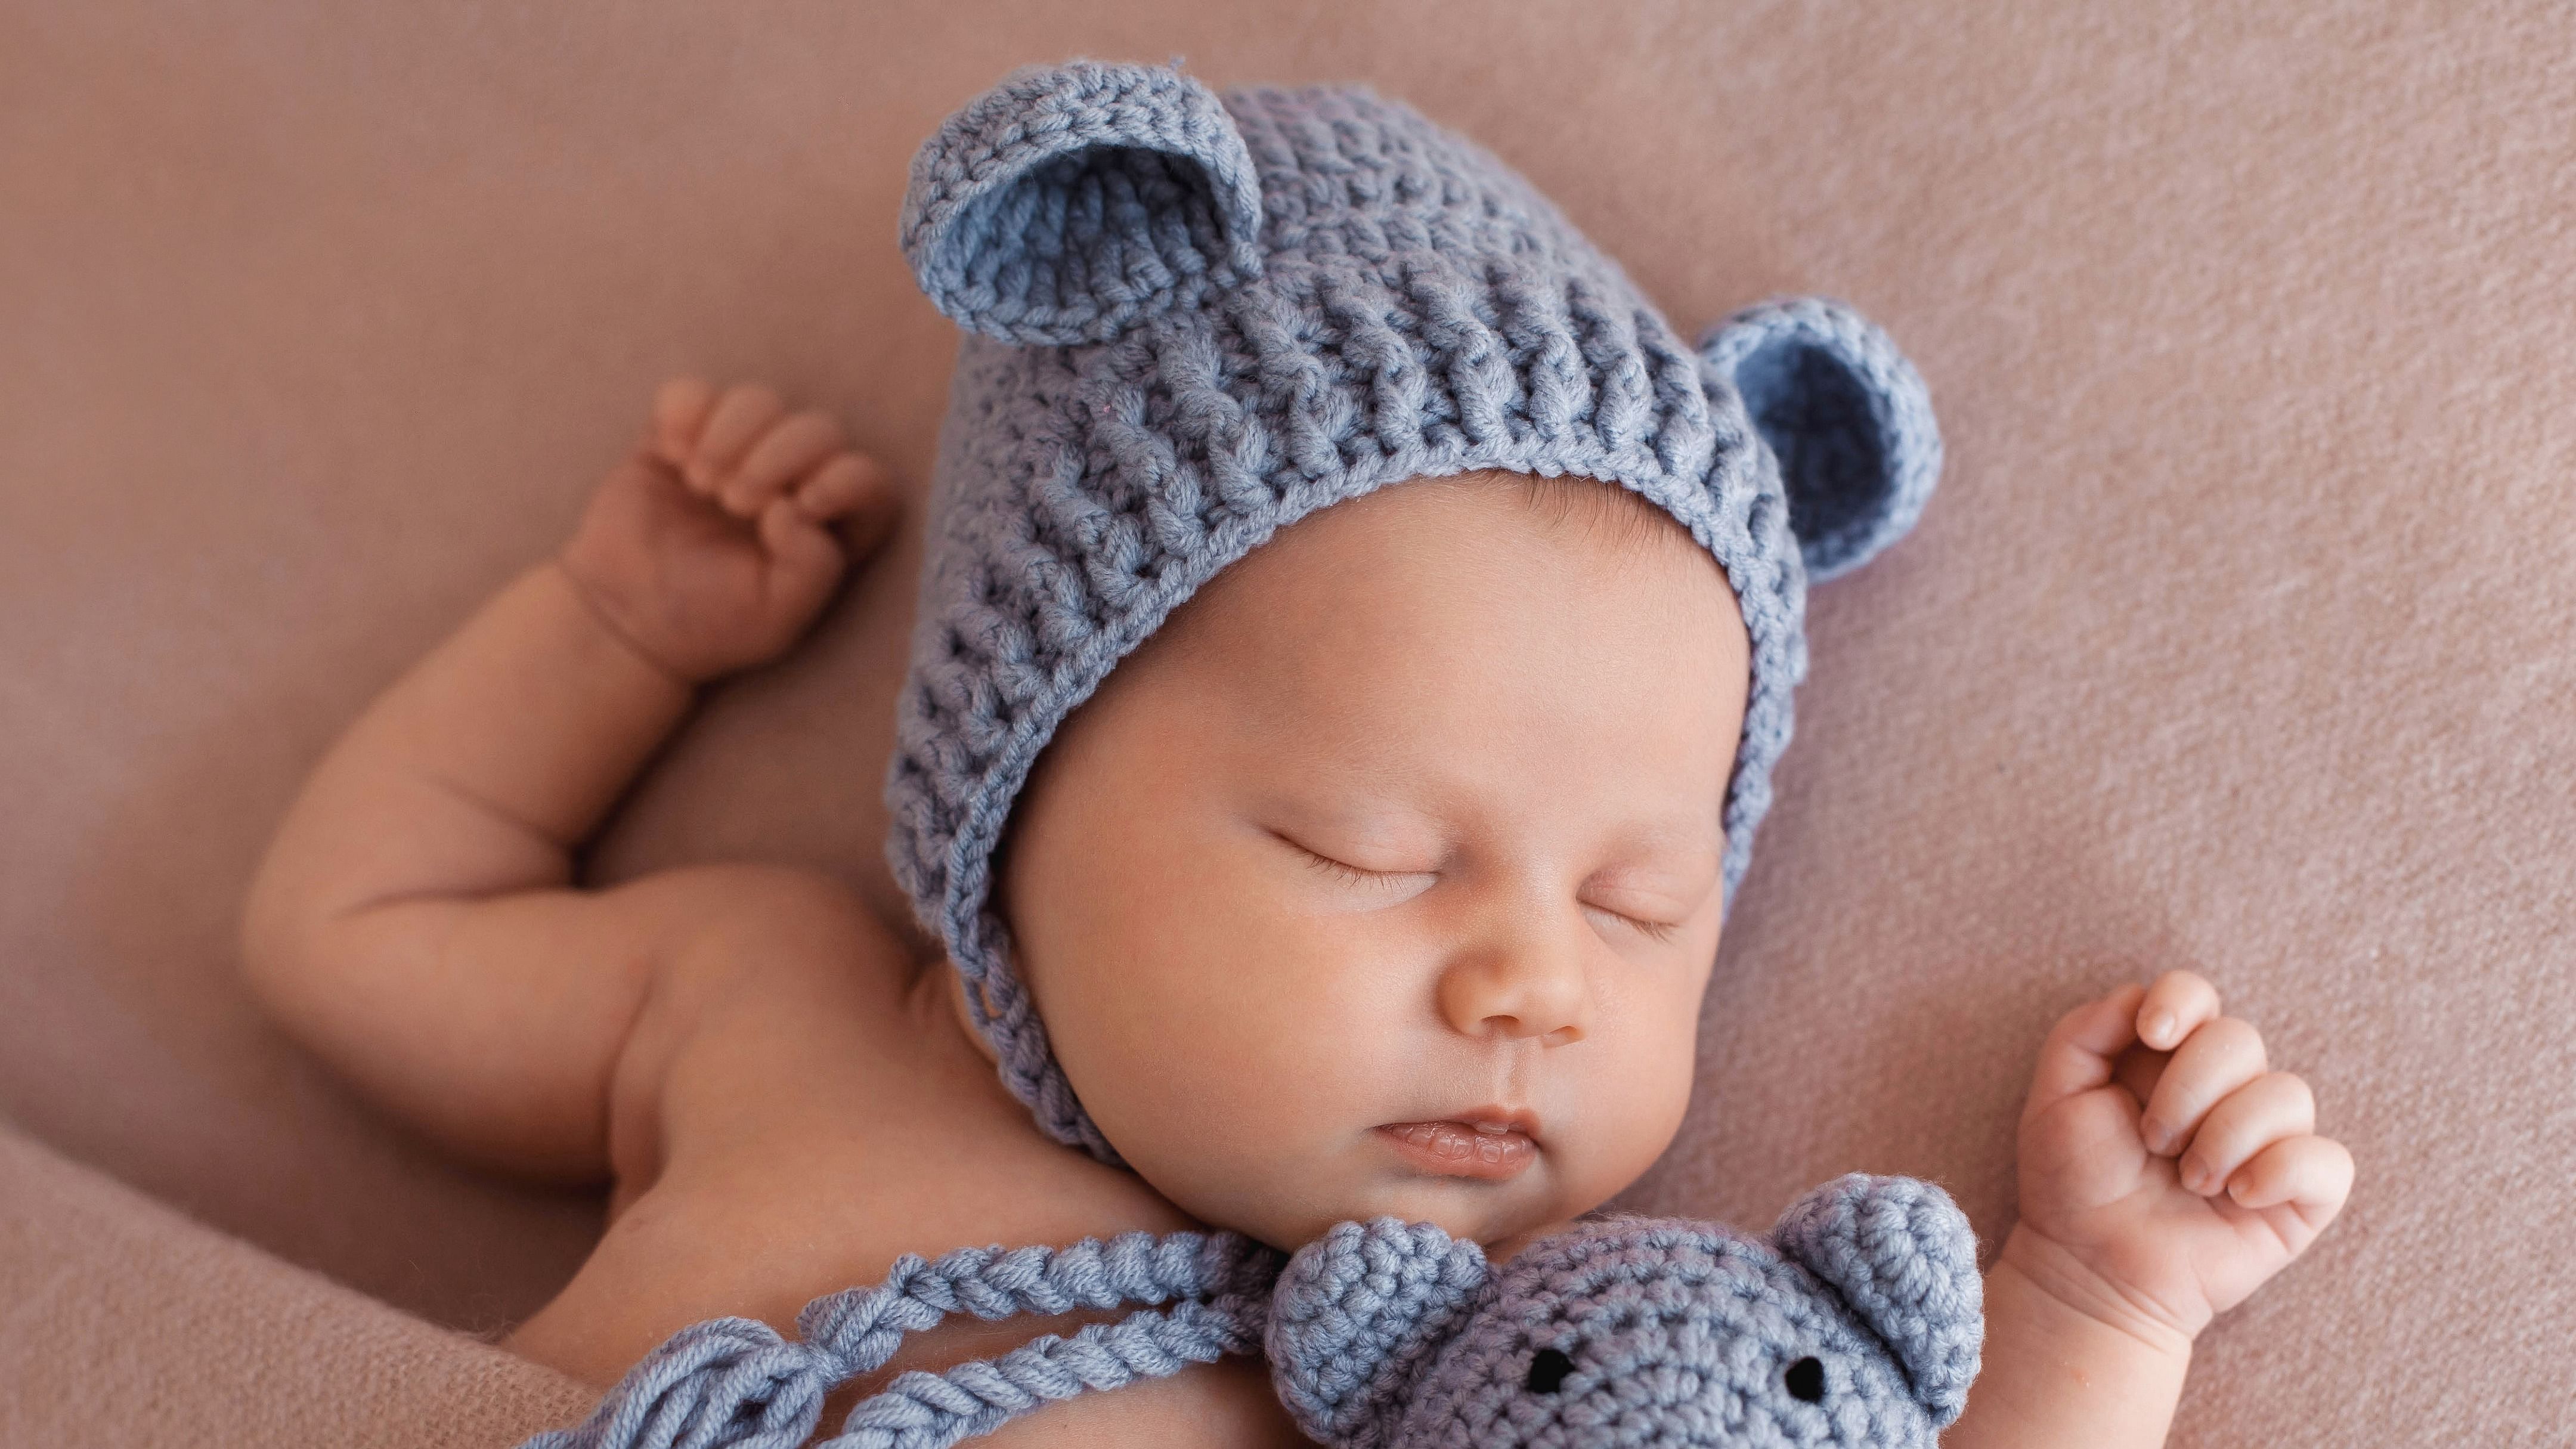 Rather than relying on charts of average sleep patterns, we can tell a baby has slept sufficiently if they are alert and happy when they are awake. Credit; iStock Photo